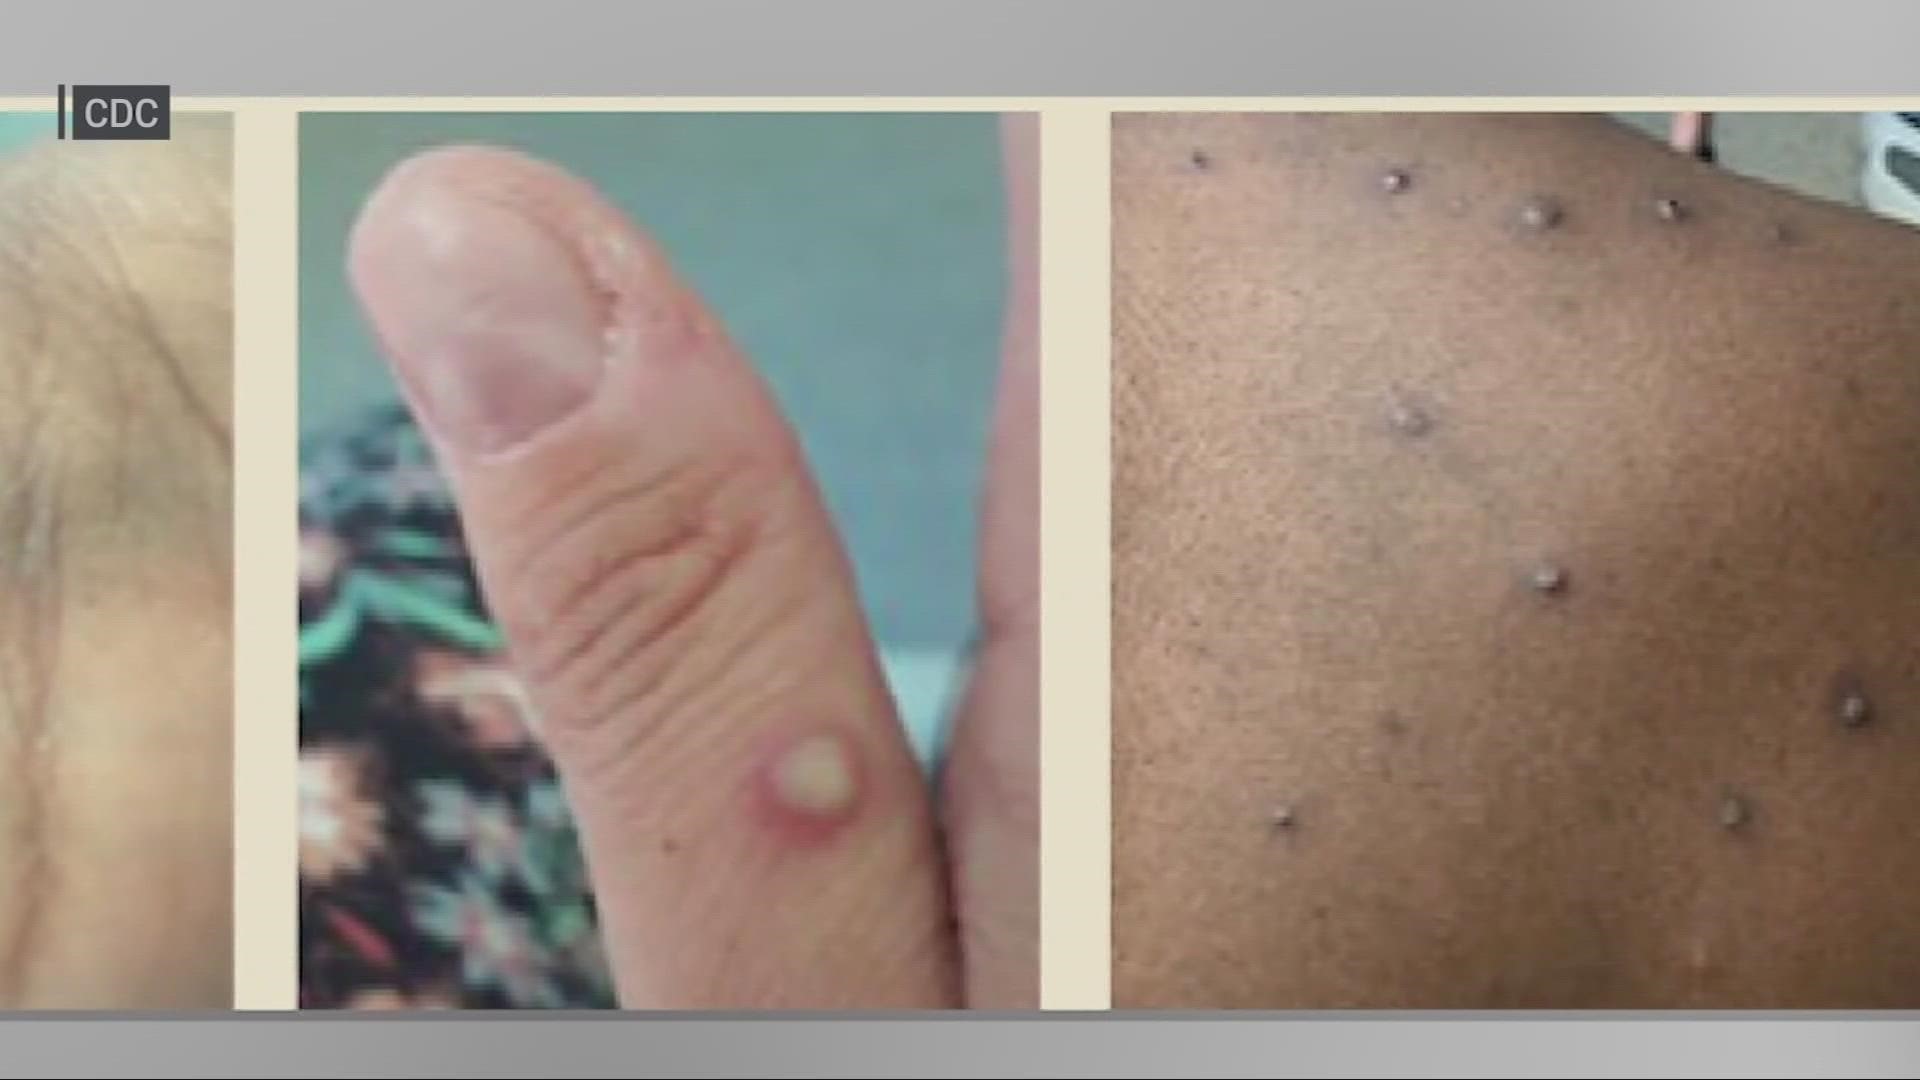 College students are being warned to pay attention to reports about Monkeypox